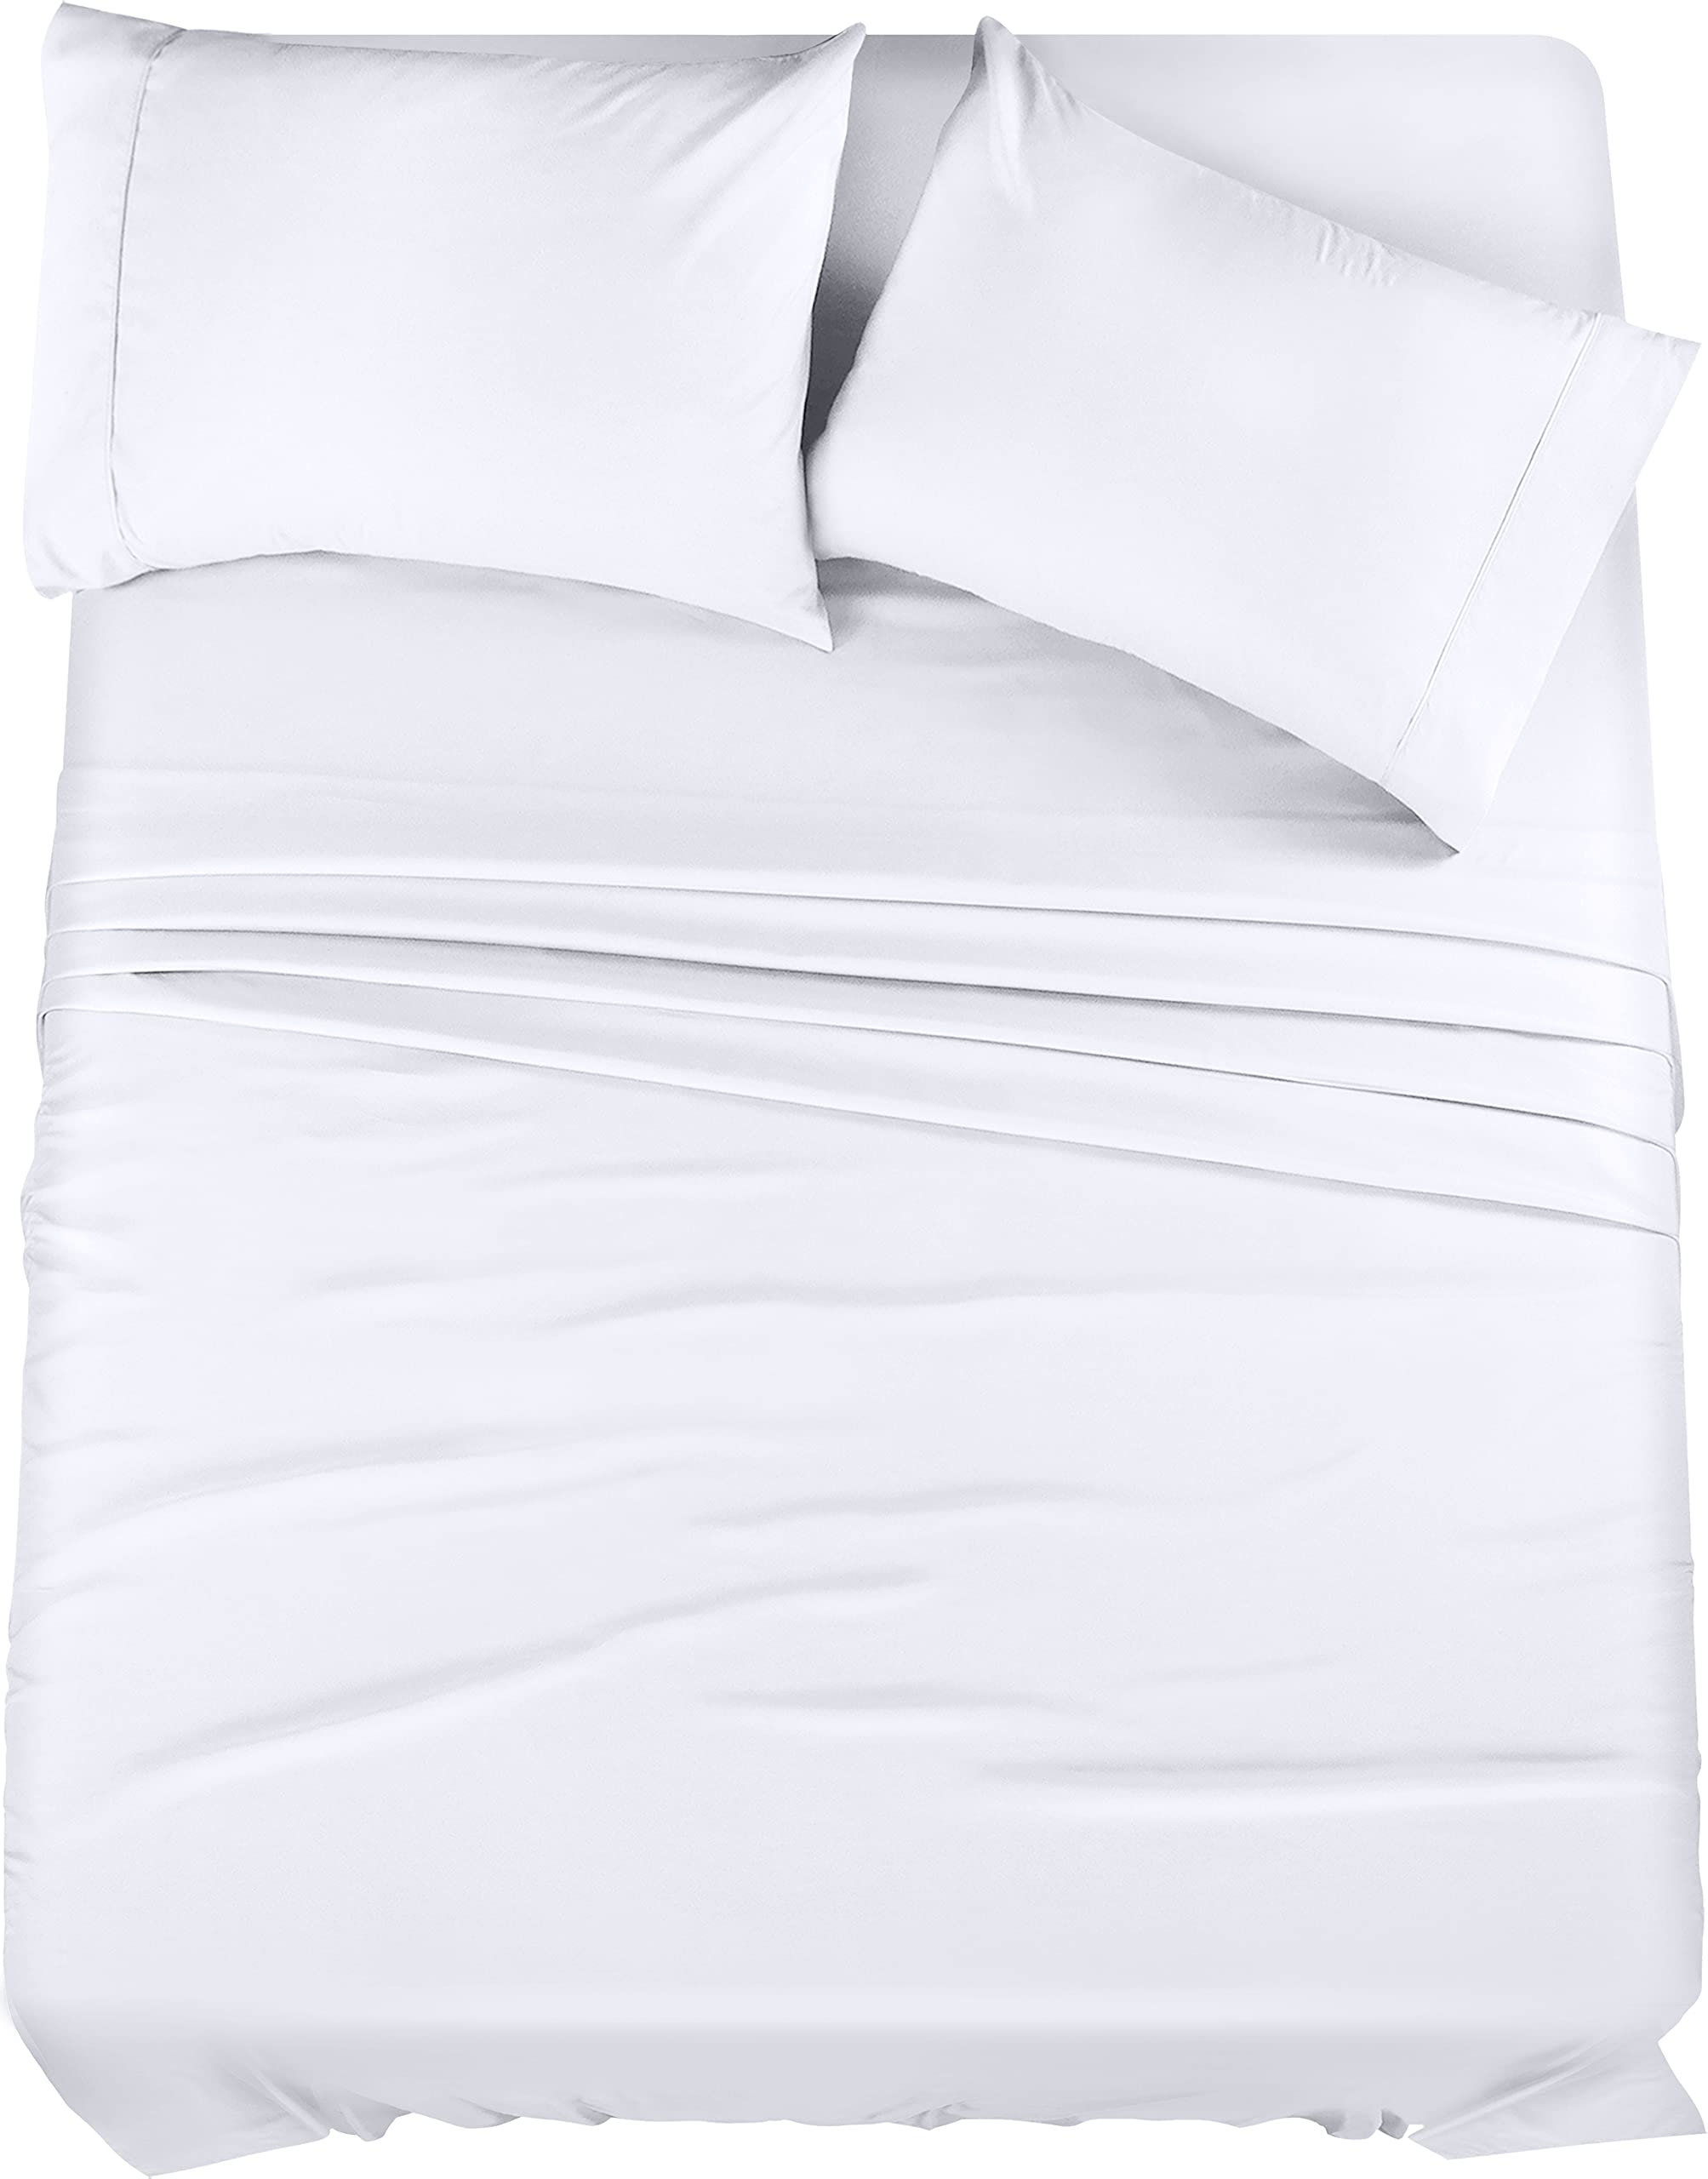 Book Cover Utopia Bedding King Bed Sheets Set - 4 Piece Bedding - Brushed Microfiber - Shrinkage and Fade Resistant - Easy Care (King, White) King White